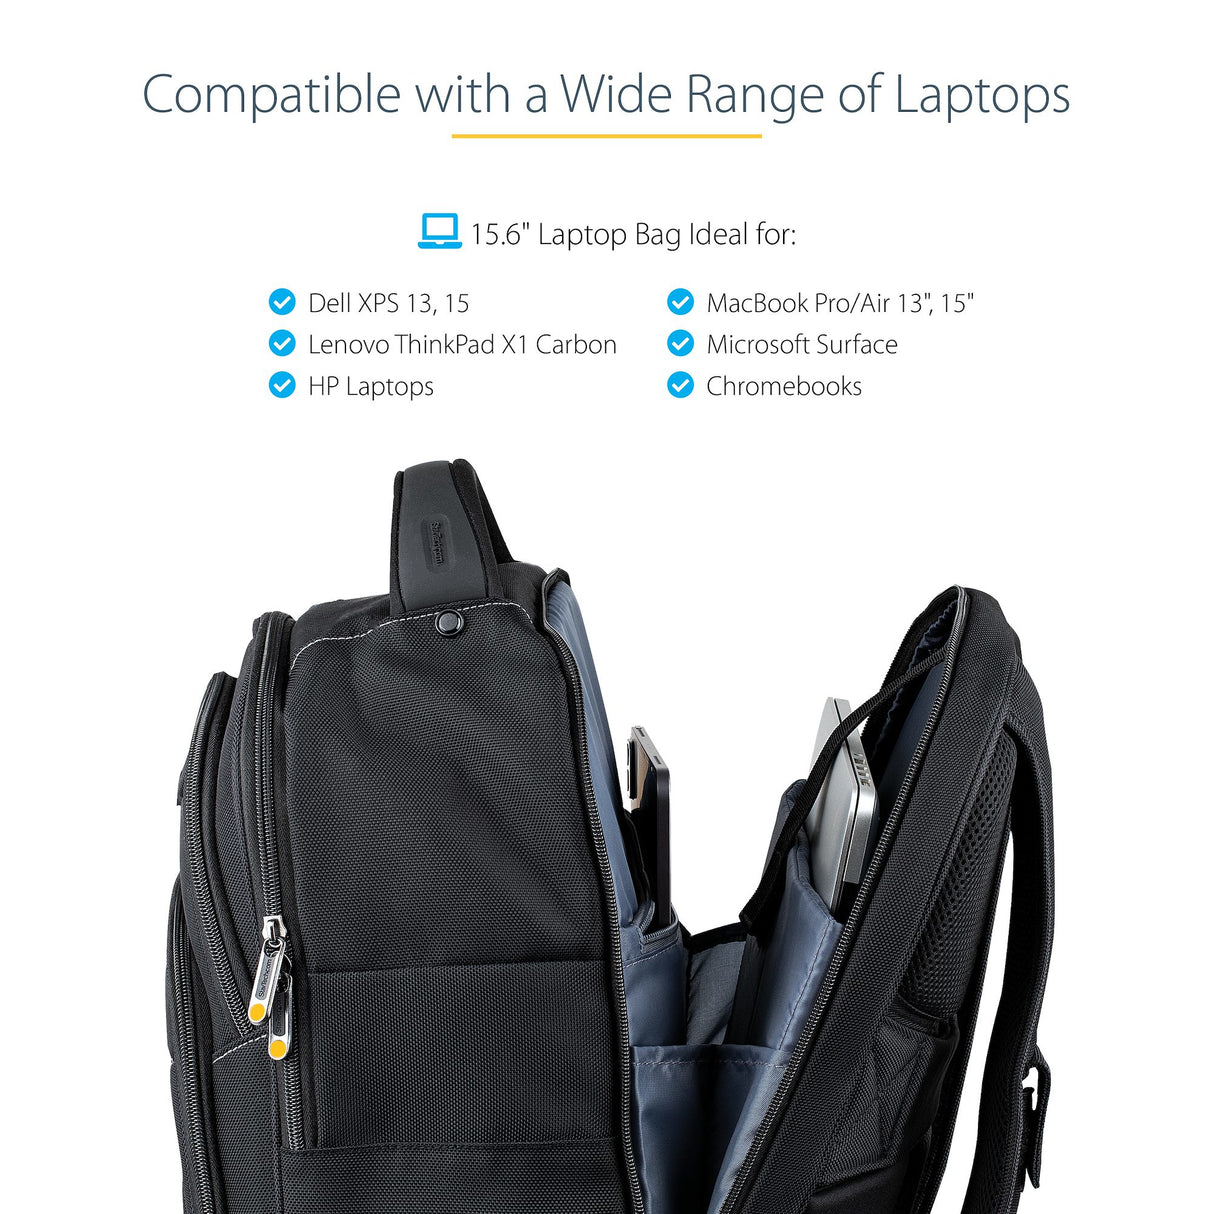 STARTECH 15.6" Laptop Backpack with Removable Accessory Case - Professional IT Tech Backpack for Work|Travel|Commute - Durable Ergonomic Computer Bag - Nylon - Notebook|Tablet Pockets (NTBKBAG156) (NTBKBAG156) STARTECH